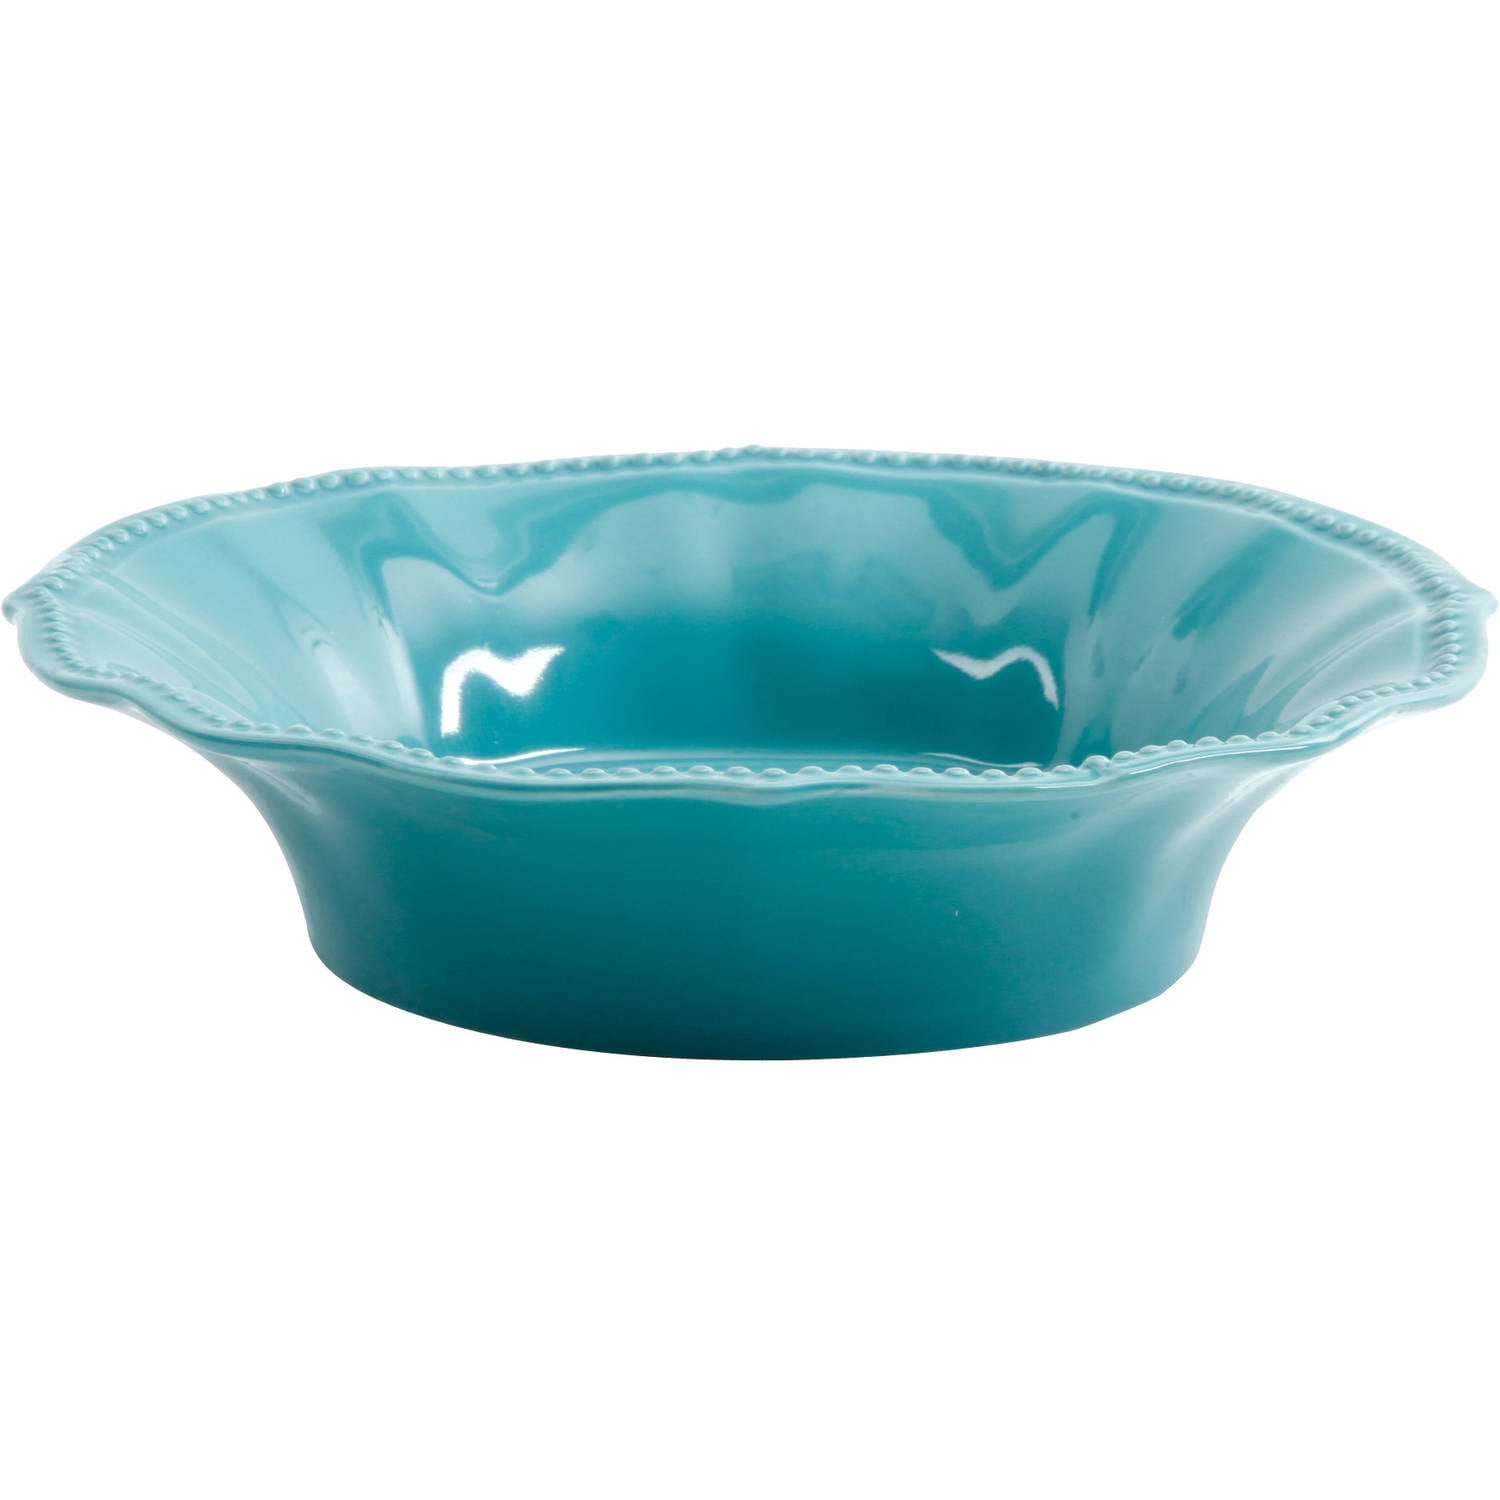 The Pioneer Woman Paige 12-piece Crackle Glaze Dinnerware Set Turquoise 